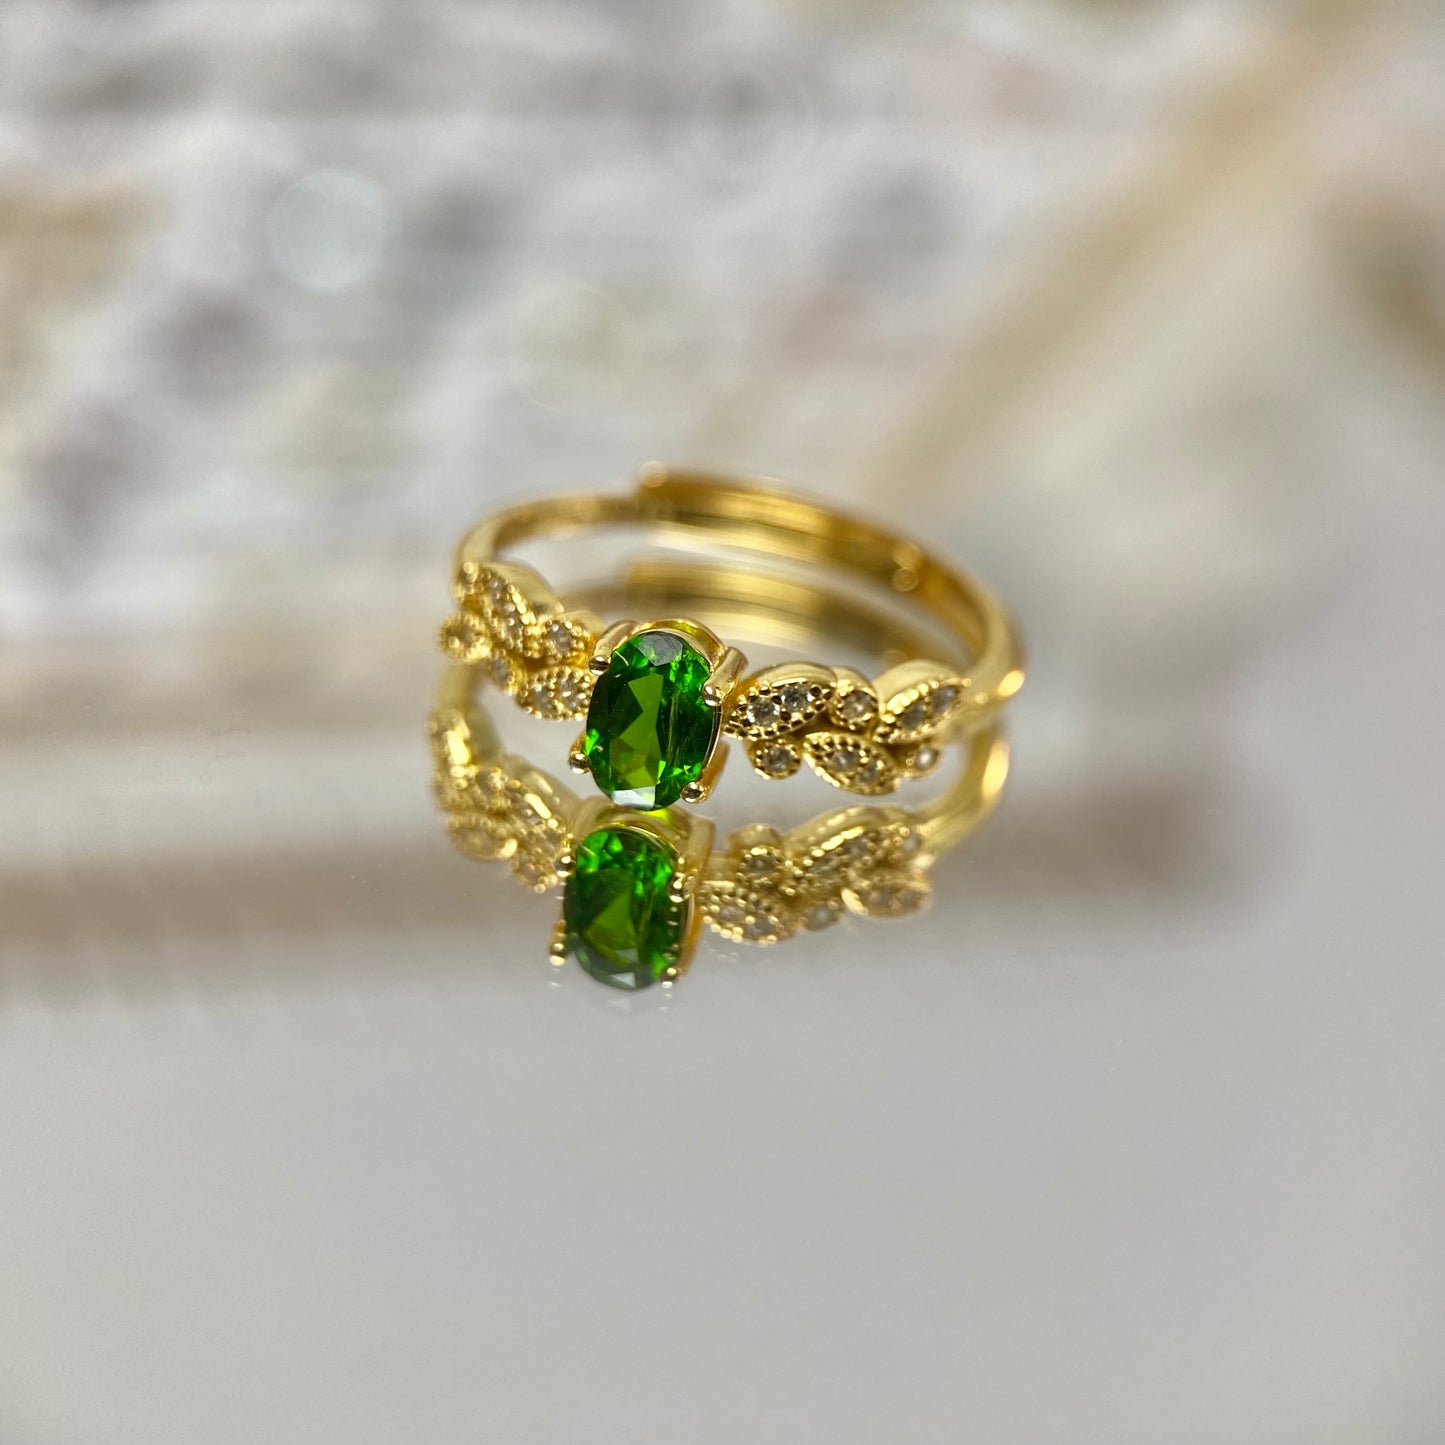 Diopside silver 925 ring